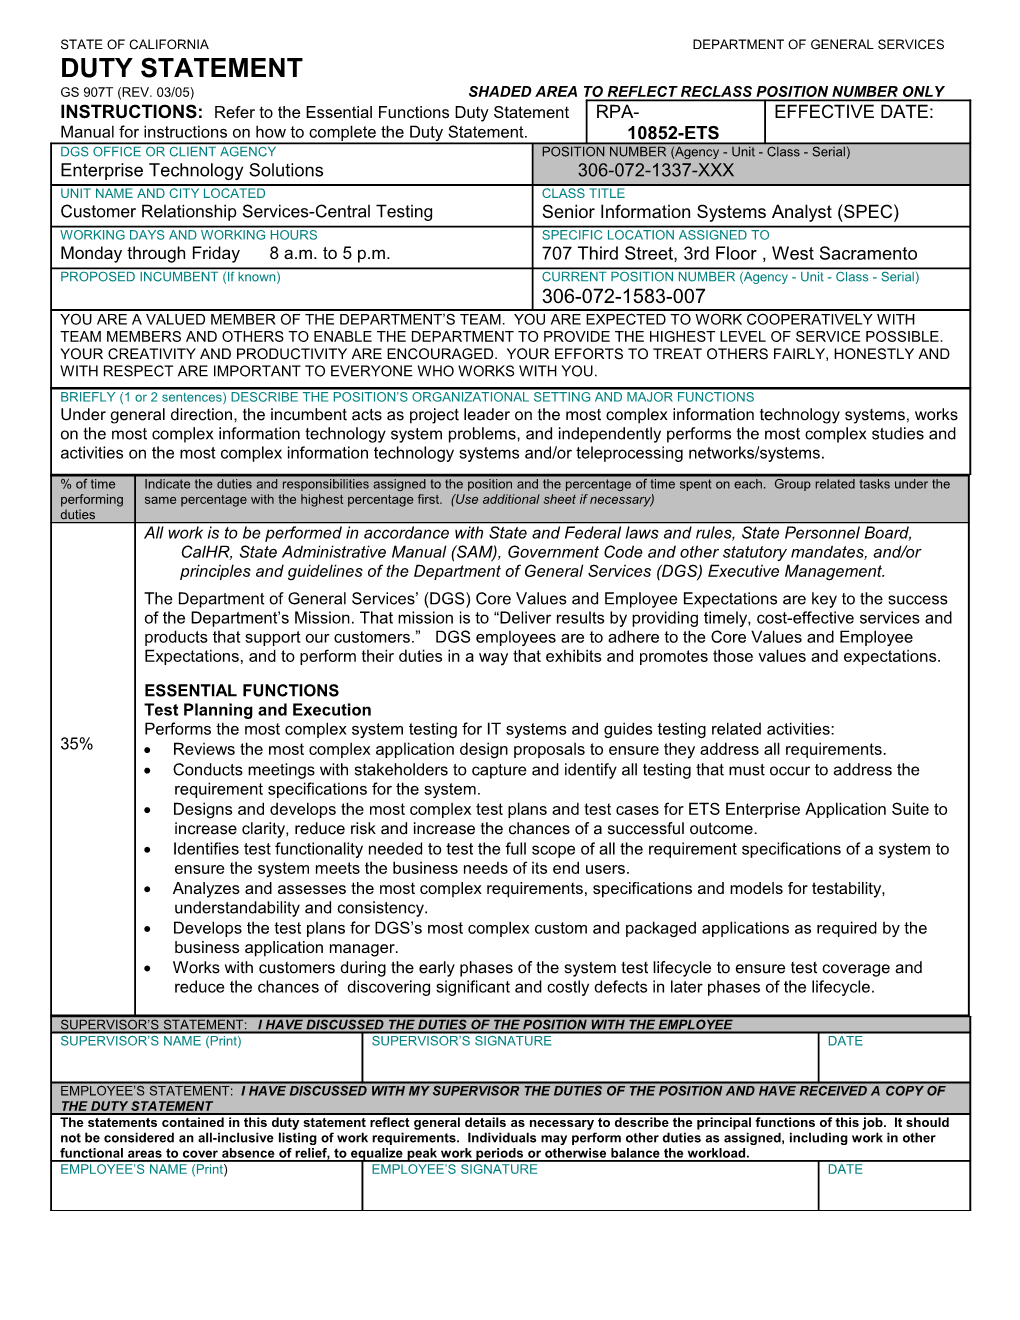 State of California Department of General Services Duty Statement Gs 907T (Rev. 03/05)